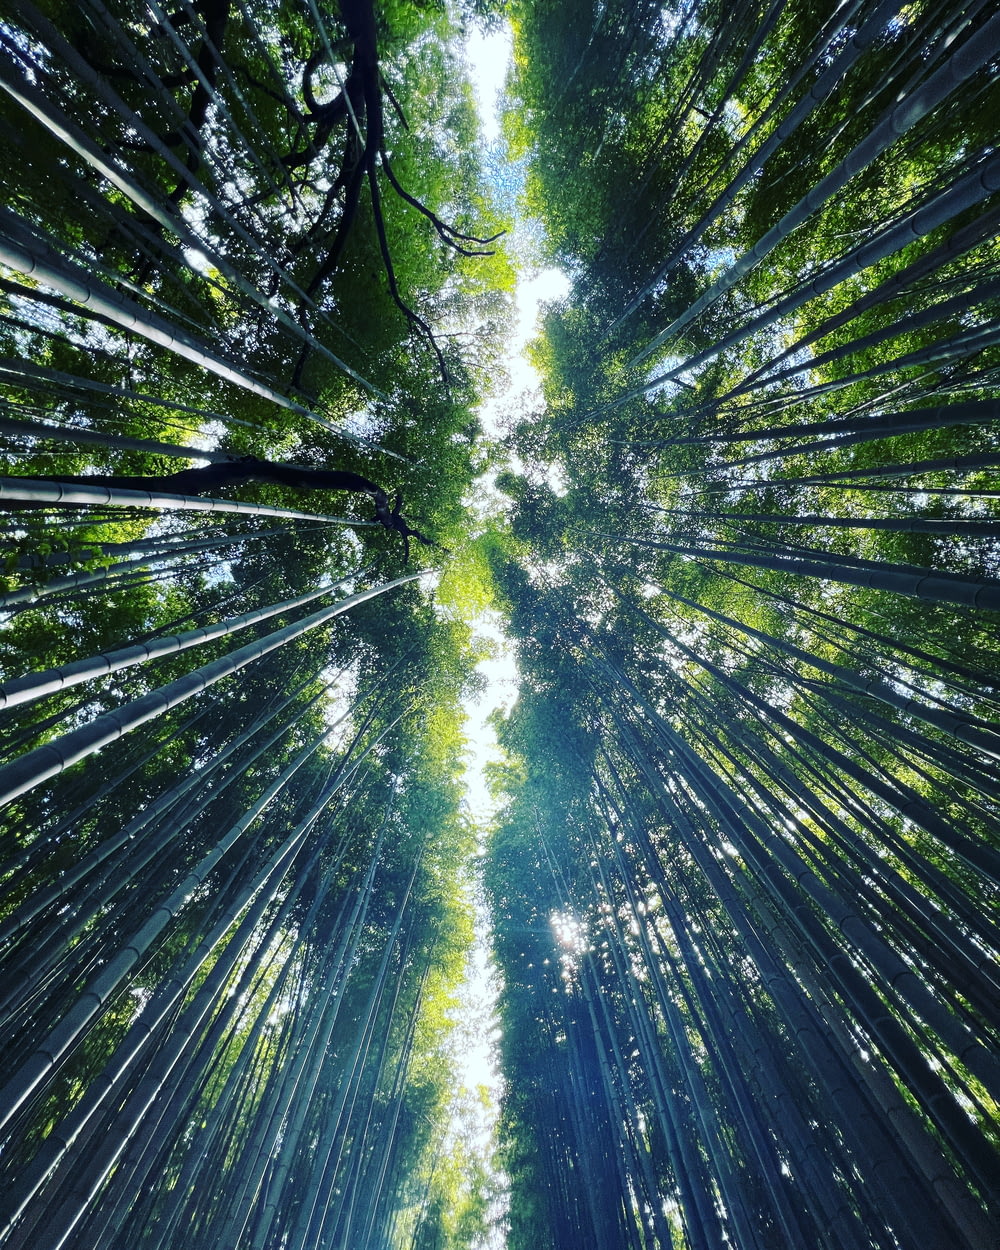 a view looking up into a forest filled with tall trees